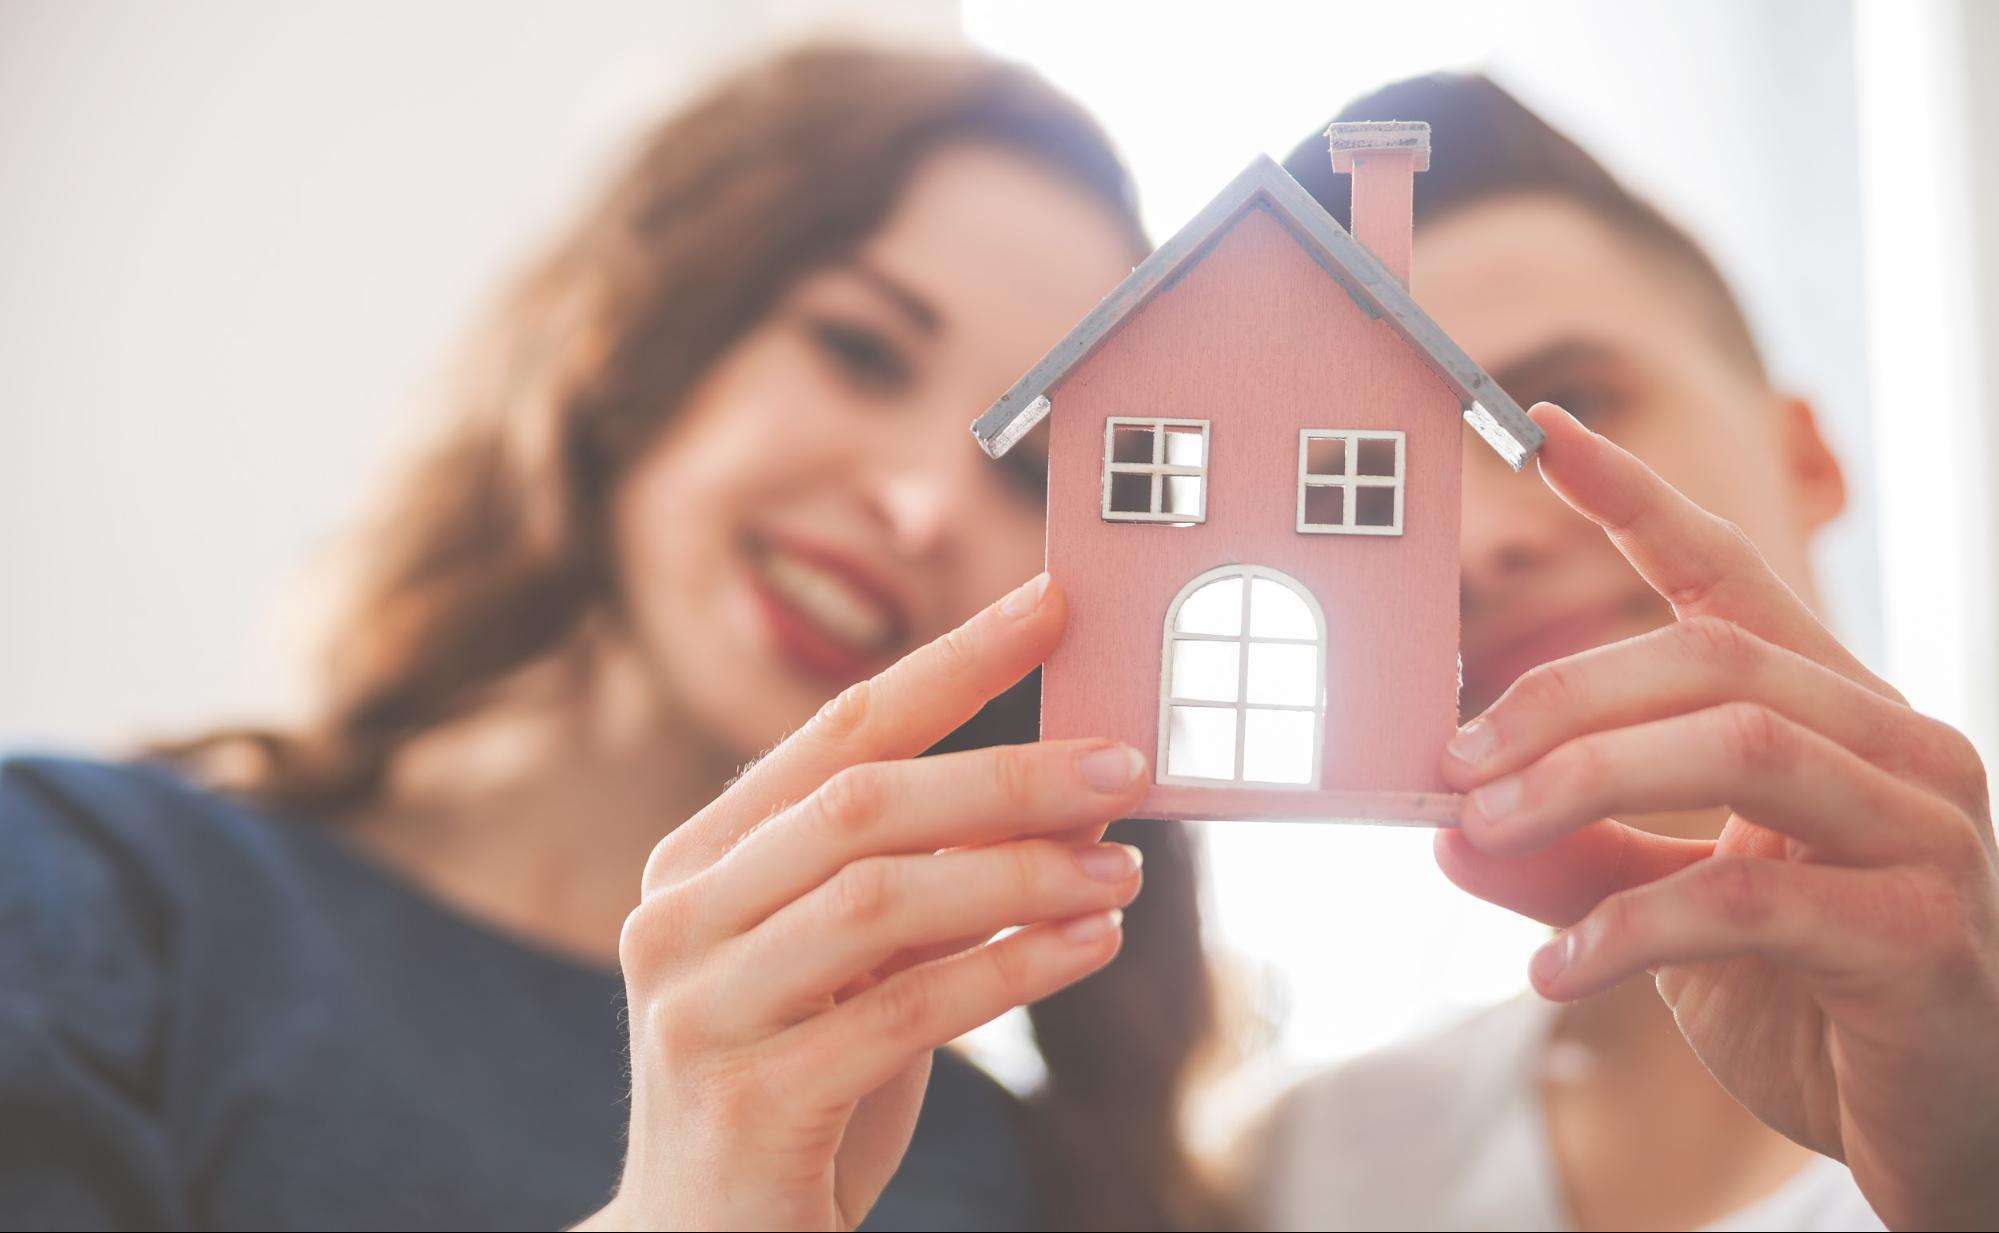 Tips to Find The Home of Your Dreams